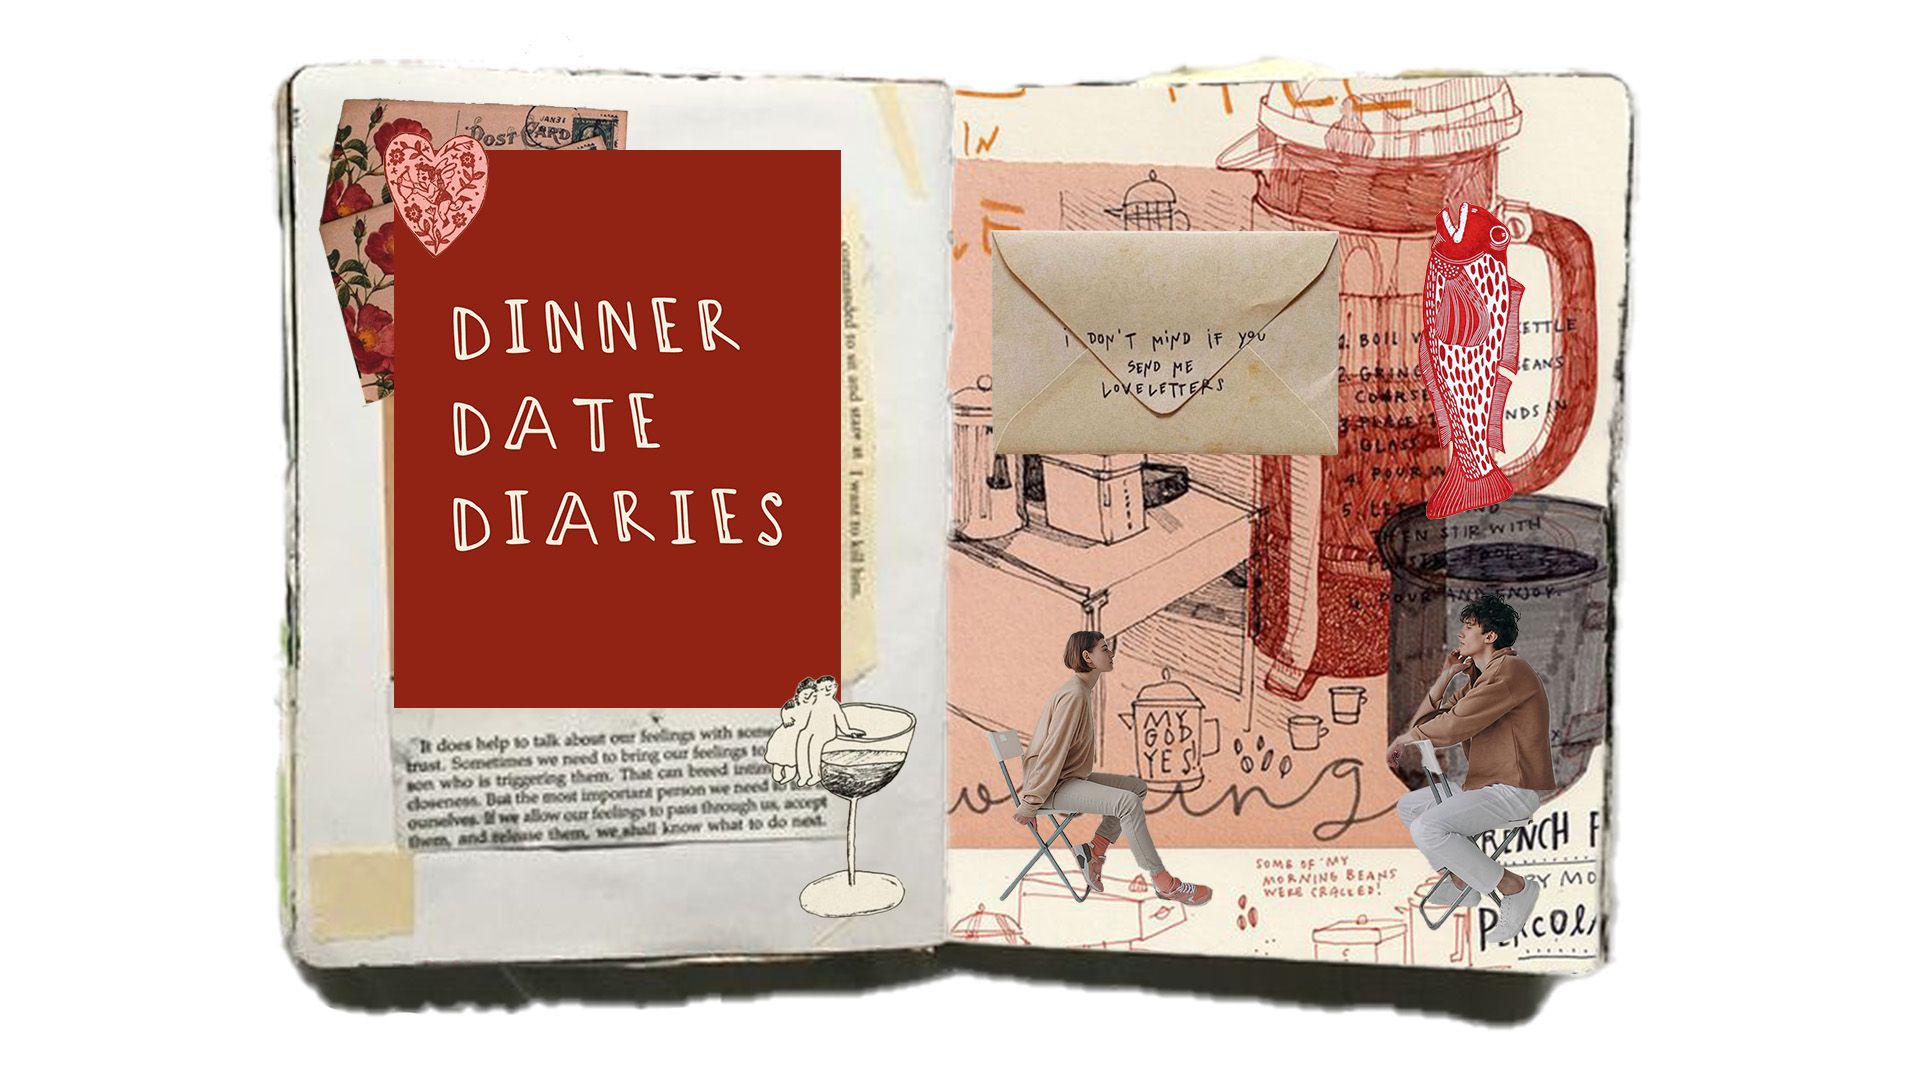 The Dinner Date Diaries: An Intimate Journaling Experience